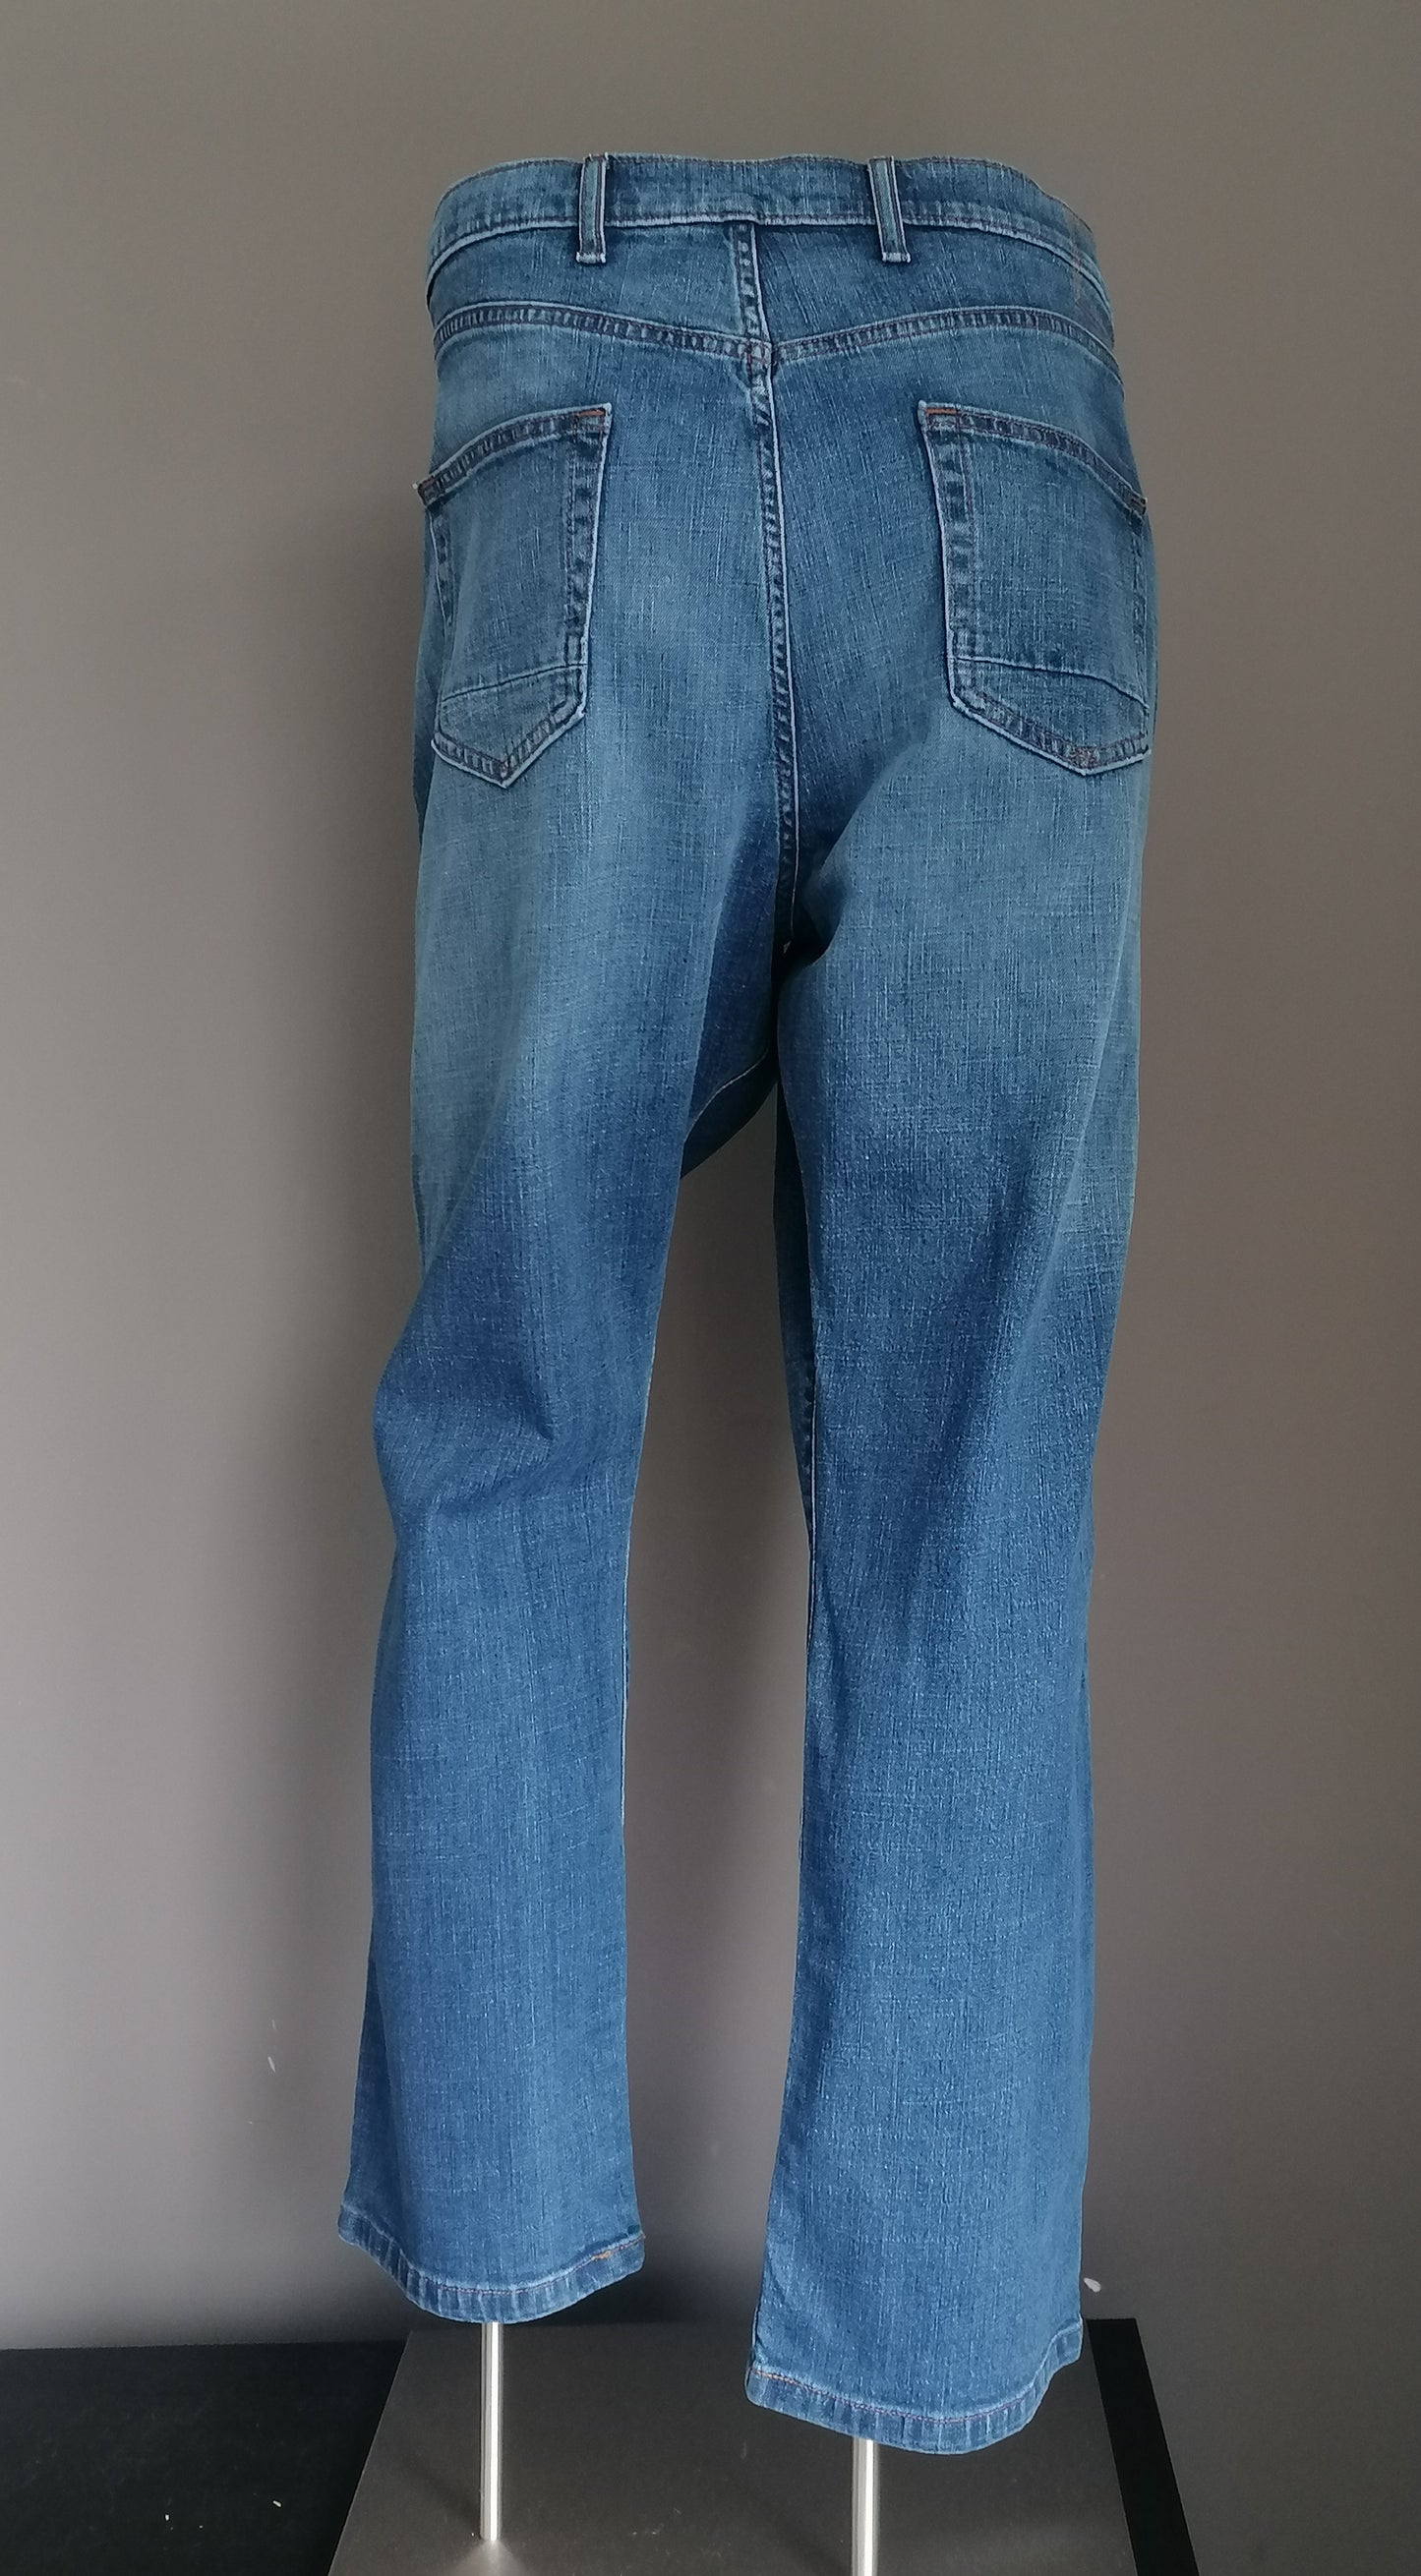 M&S (Marks & Spencer) Jeans. Blue colored. Tapered. Size W44 - L30. Stretch.